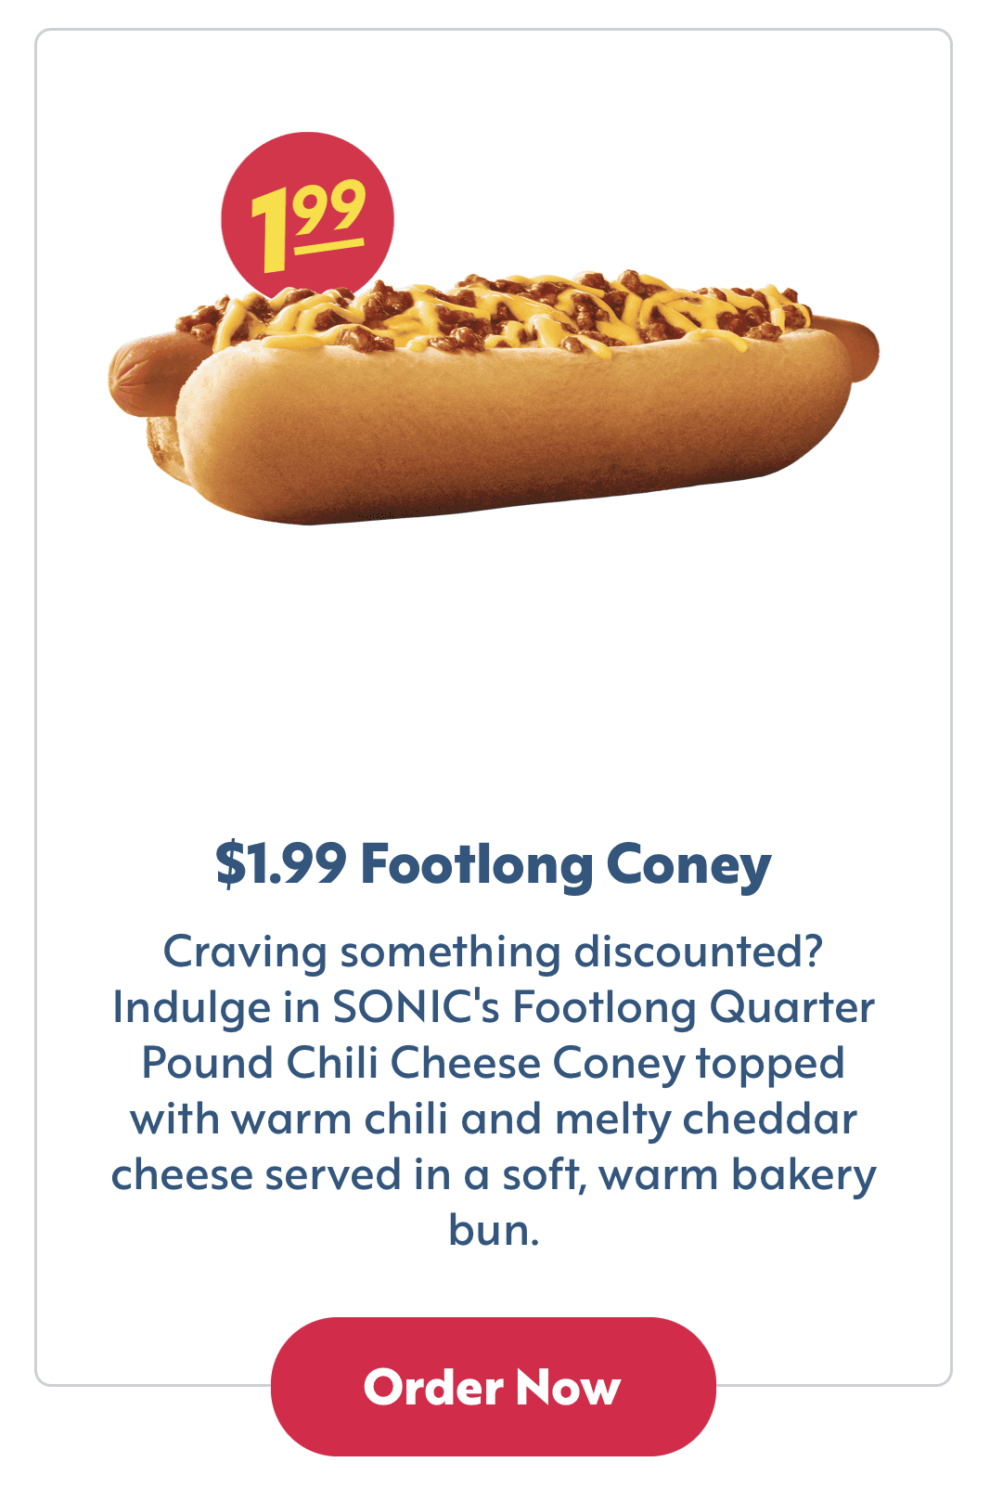 SONIC Brings Affordable Value to the Drive-In with New Under $2 Craves